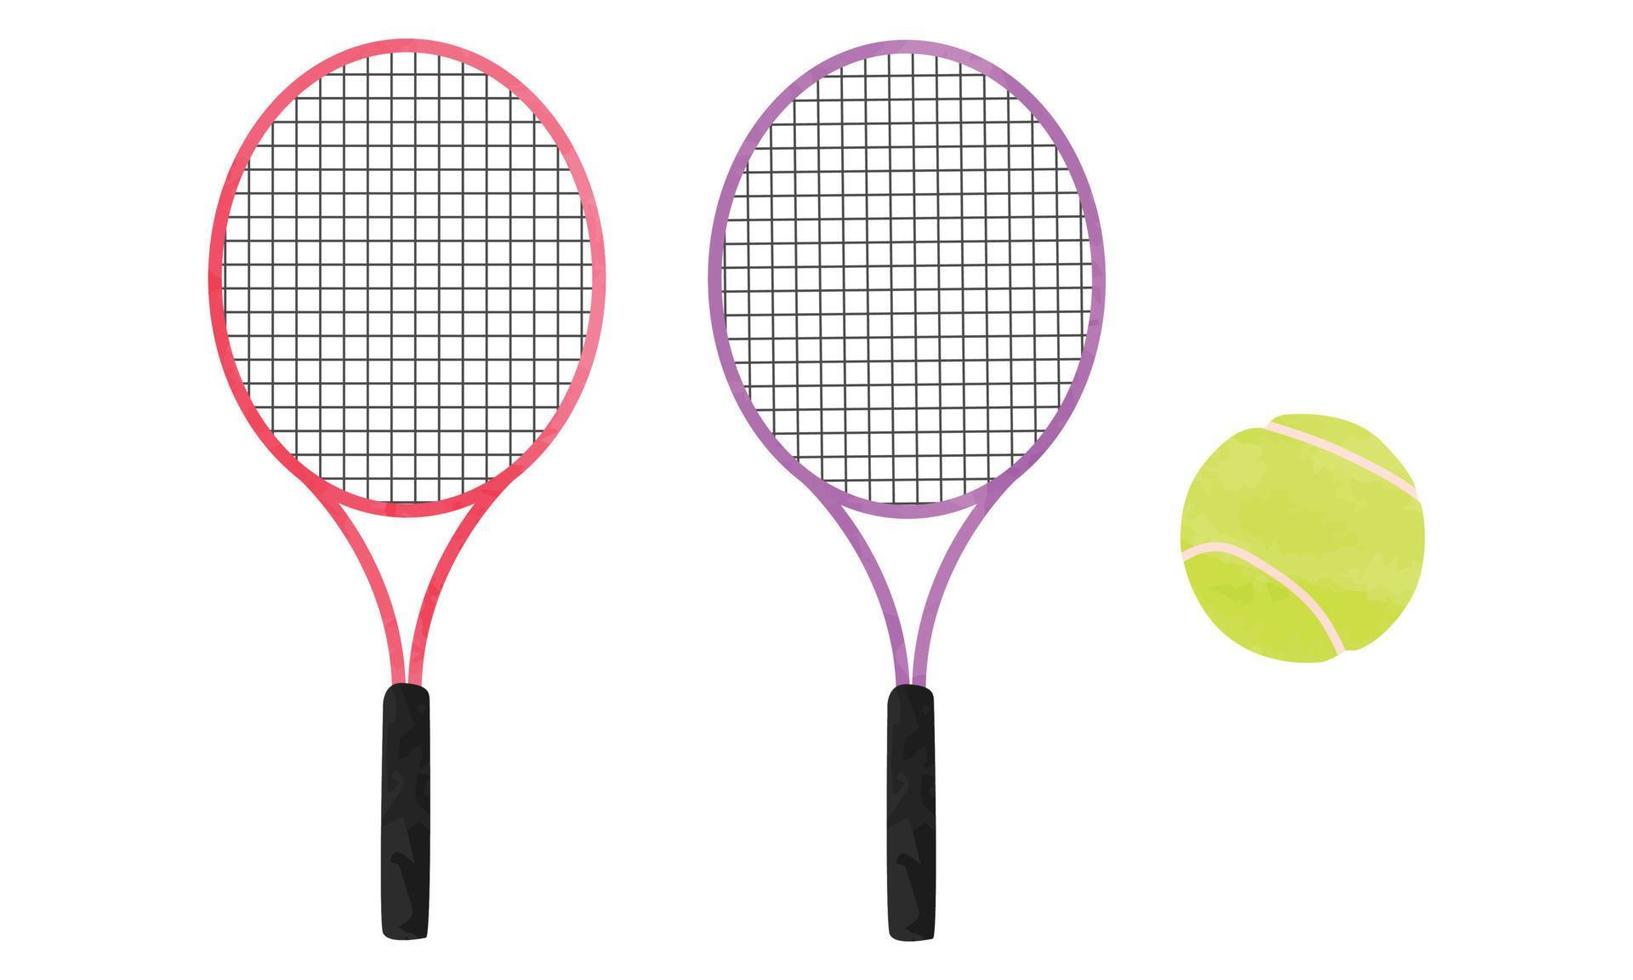 Set of tennis rackets and ball watercolor style vector illustration isolated on white background. Tennis racket and ball clipart. Simple tennis racket cartoon drawing style. Sport equipment hand drawn